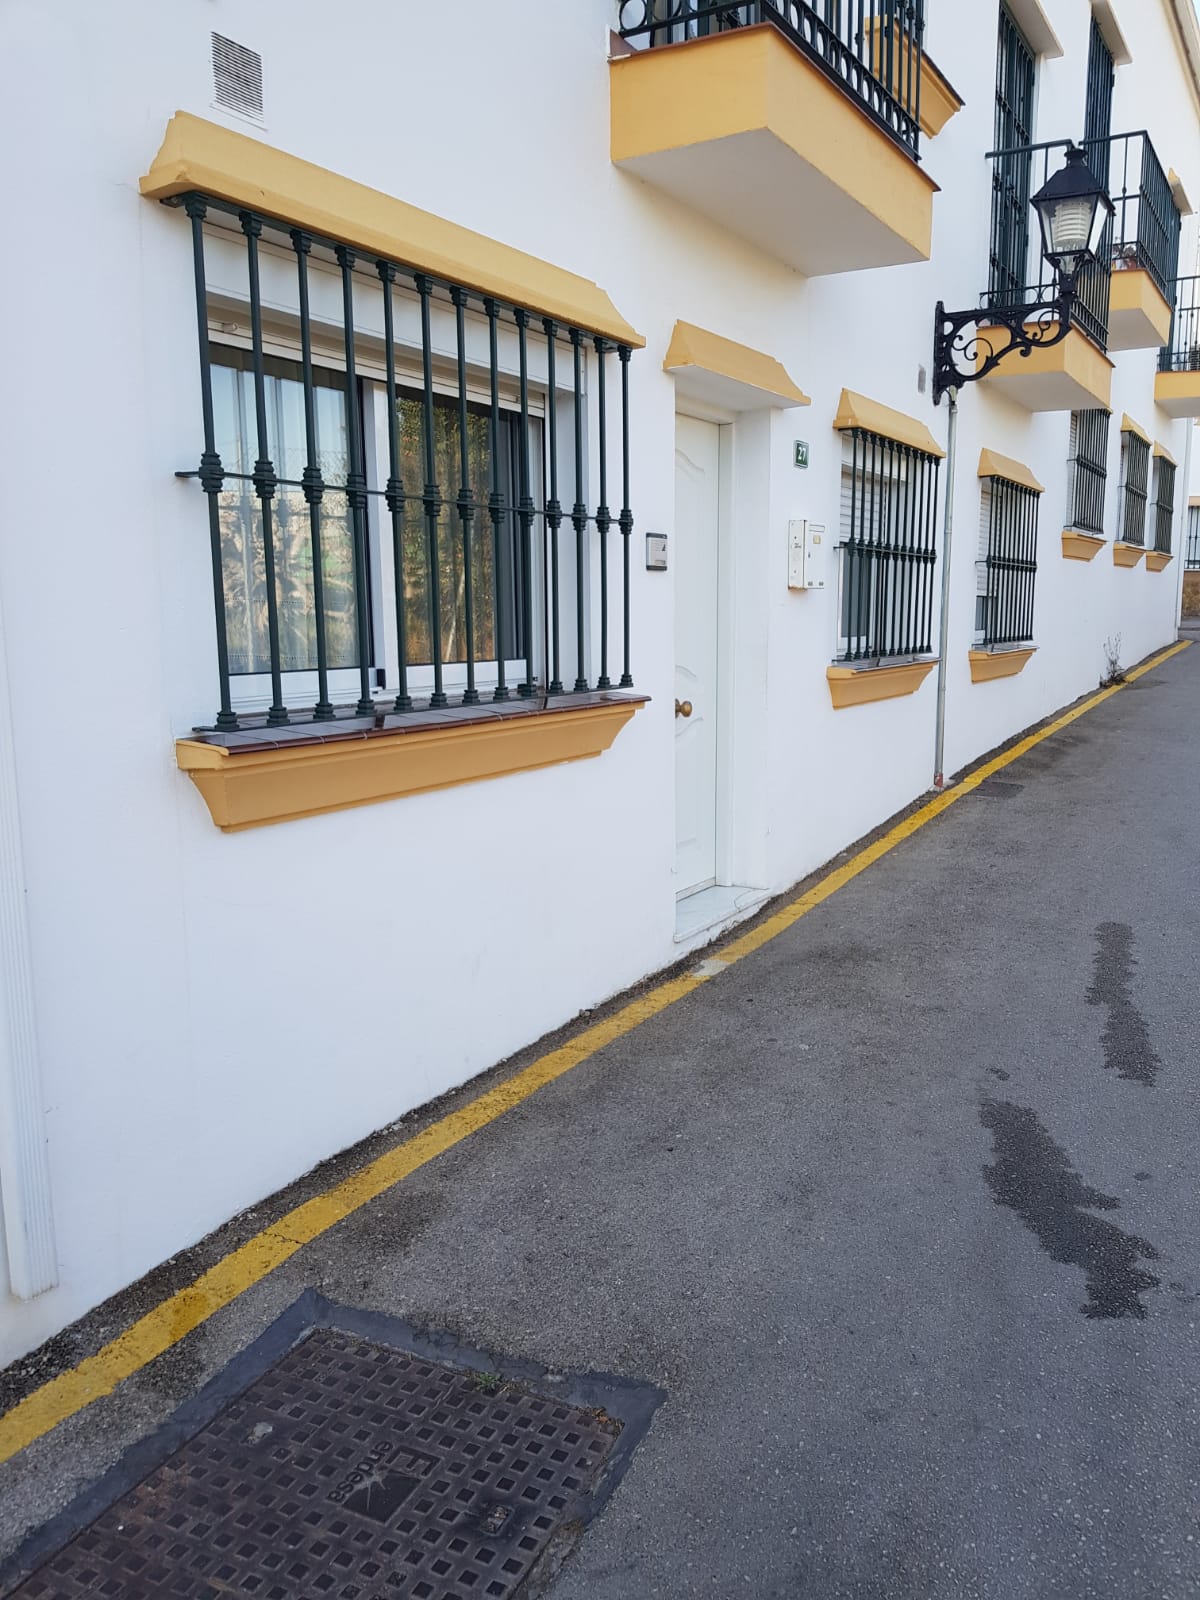 APARTMENT IN LOS PACOS, 2 Beds - 2 Baths, Built: 65m2, €149.000